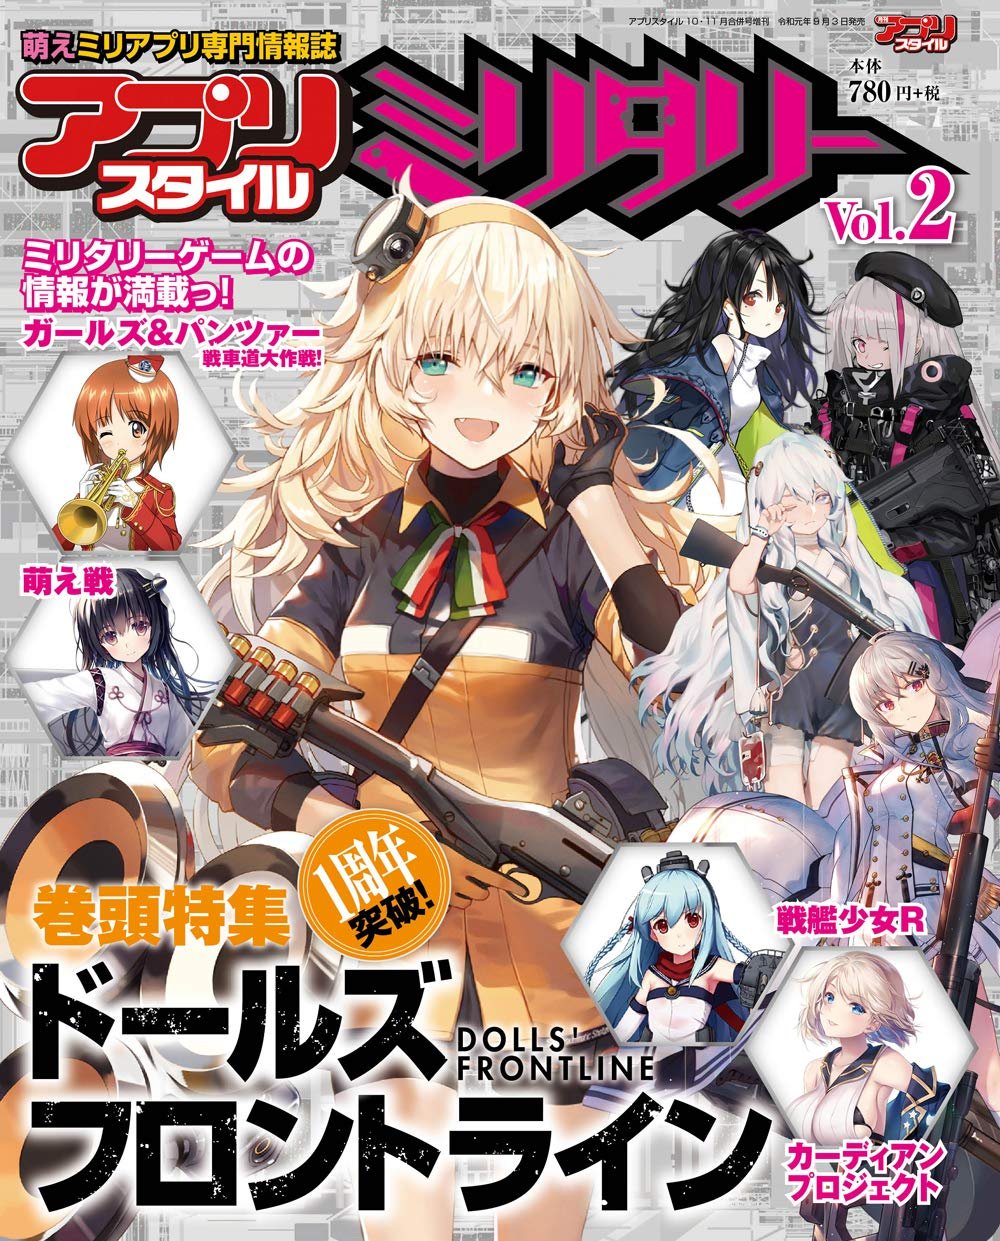 Appli Style Military Vol. 02 (October 2019)